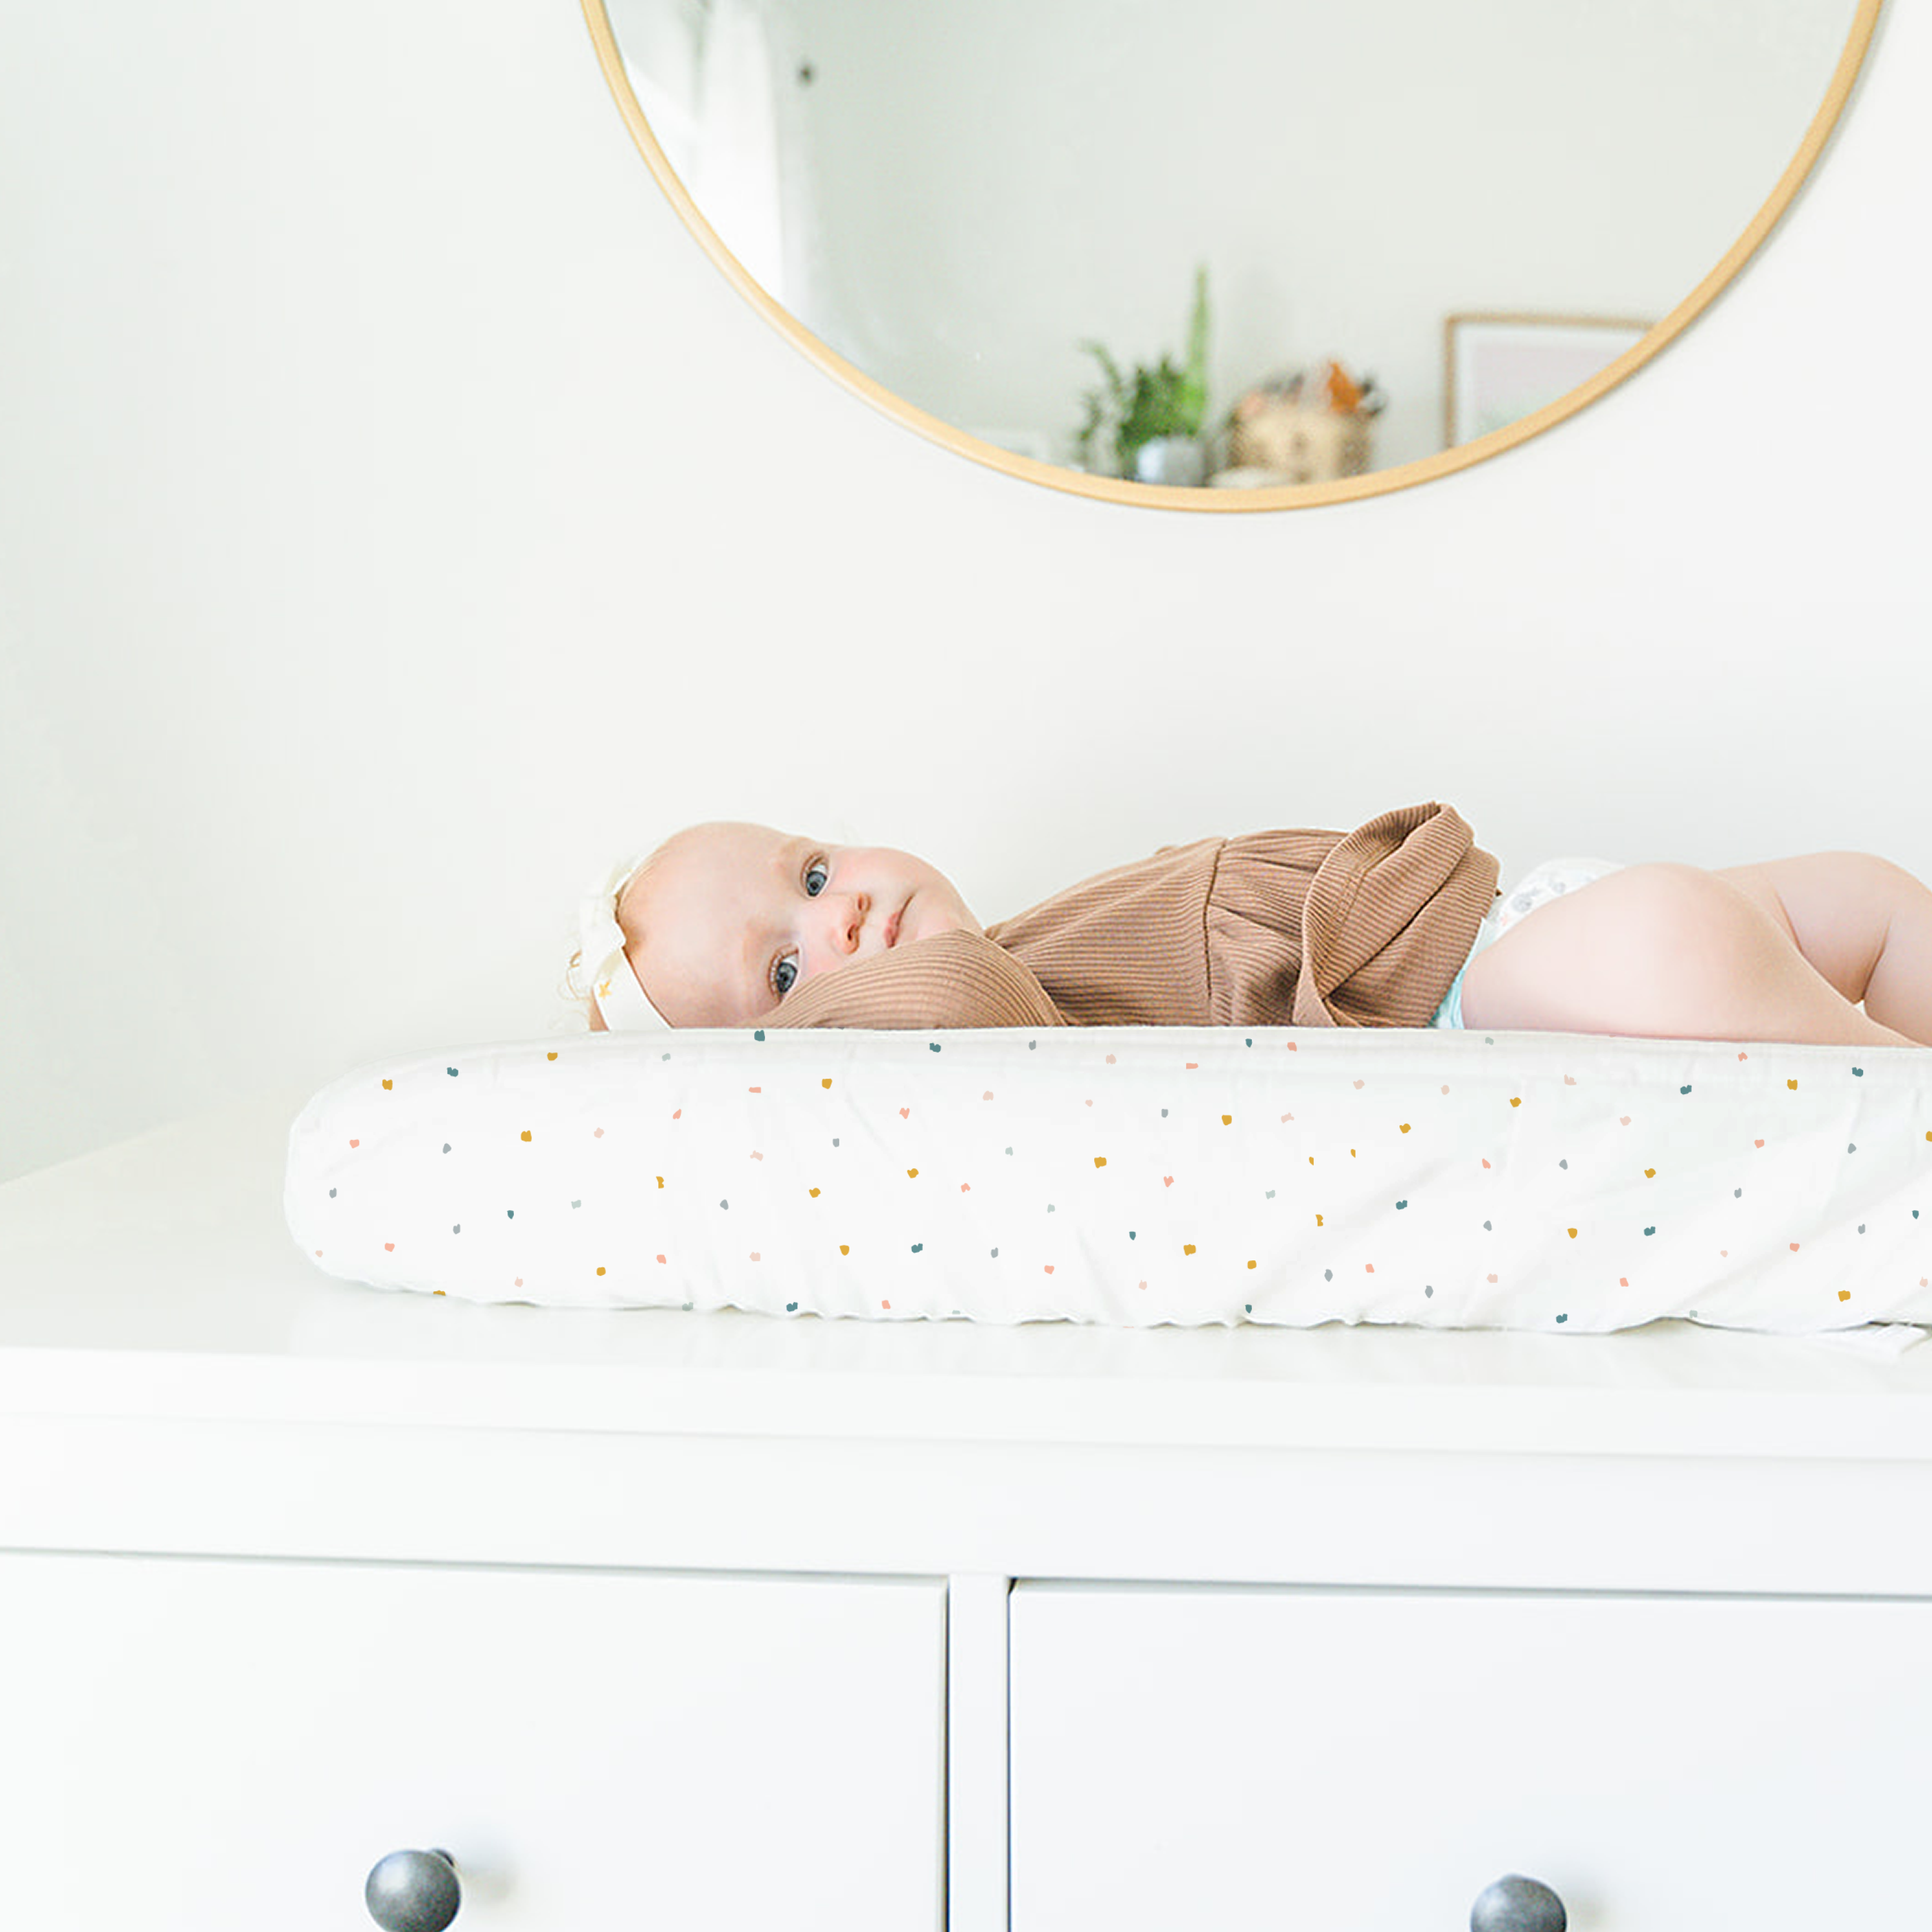 A baby wearing a brown outfit lying on a Makemake Organics Organic Cotton Changing Pad Cover - Dotty, looking up, with a round mirror overhead reflecting a light interior.